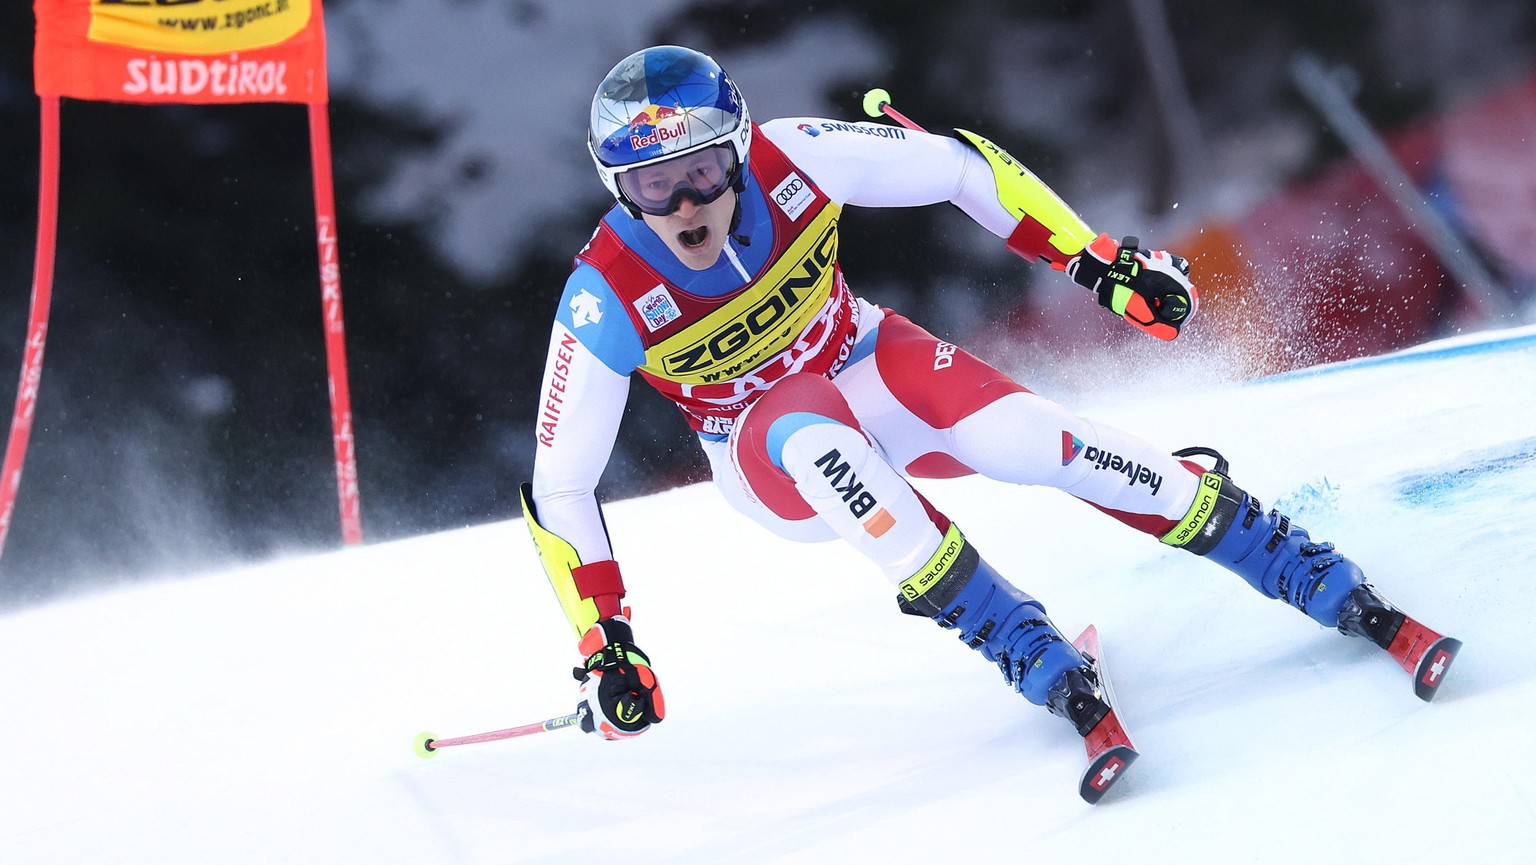 epa09651462 Marco Odermatt of Switzerland in action during the first run of the Men&#039;s Giant Slalom race at the FIS Alpine Skiing World Cup in Alta Badia, Italy, 20 December 2021. EPA/ANDREA SOLER ...